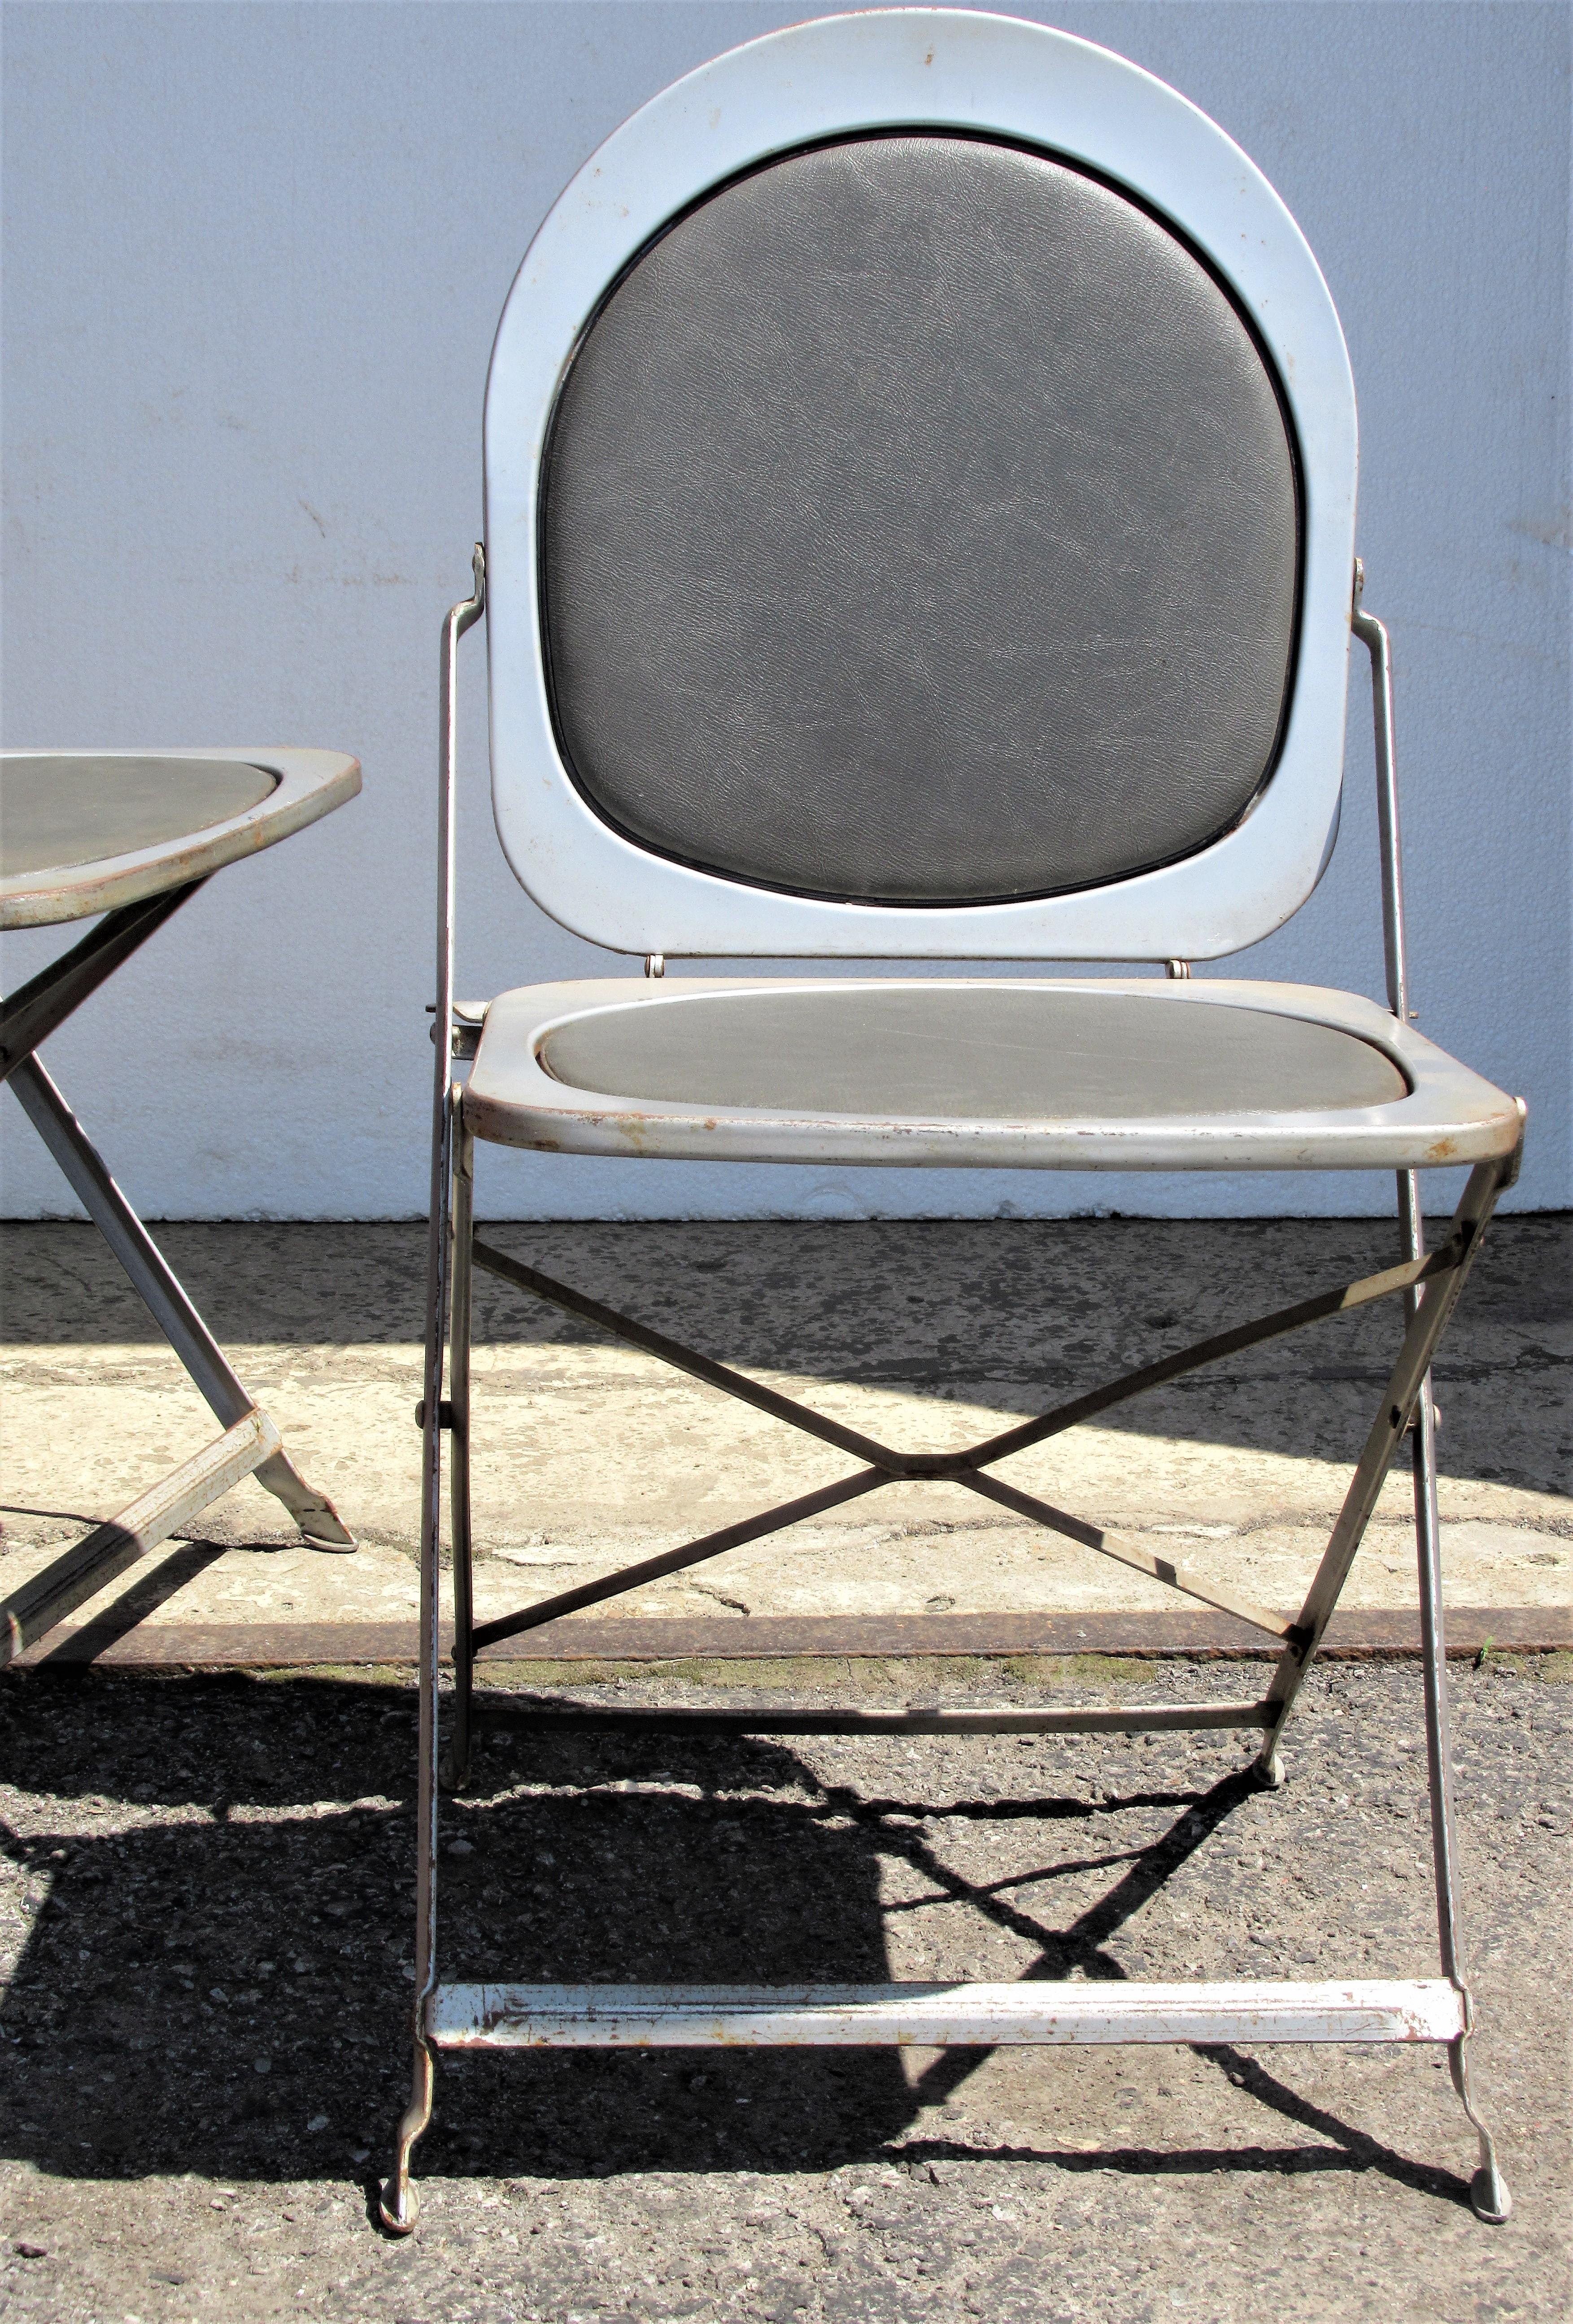 Pair of 1940s industrial machine age silvered steel folding chairs with great architectonic form and all original beautifully aged finish to metal and the oil cloth upholstered seats and backs. Look at all pictures and read condition report in